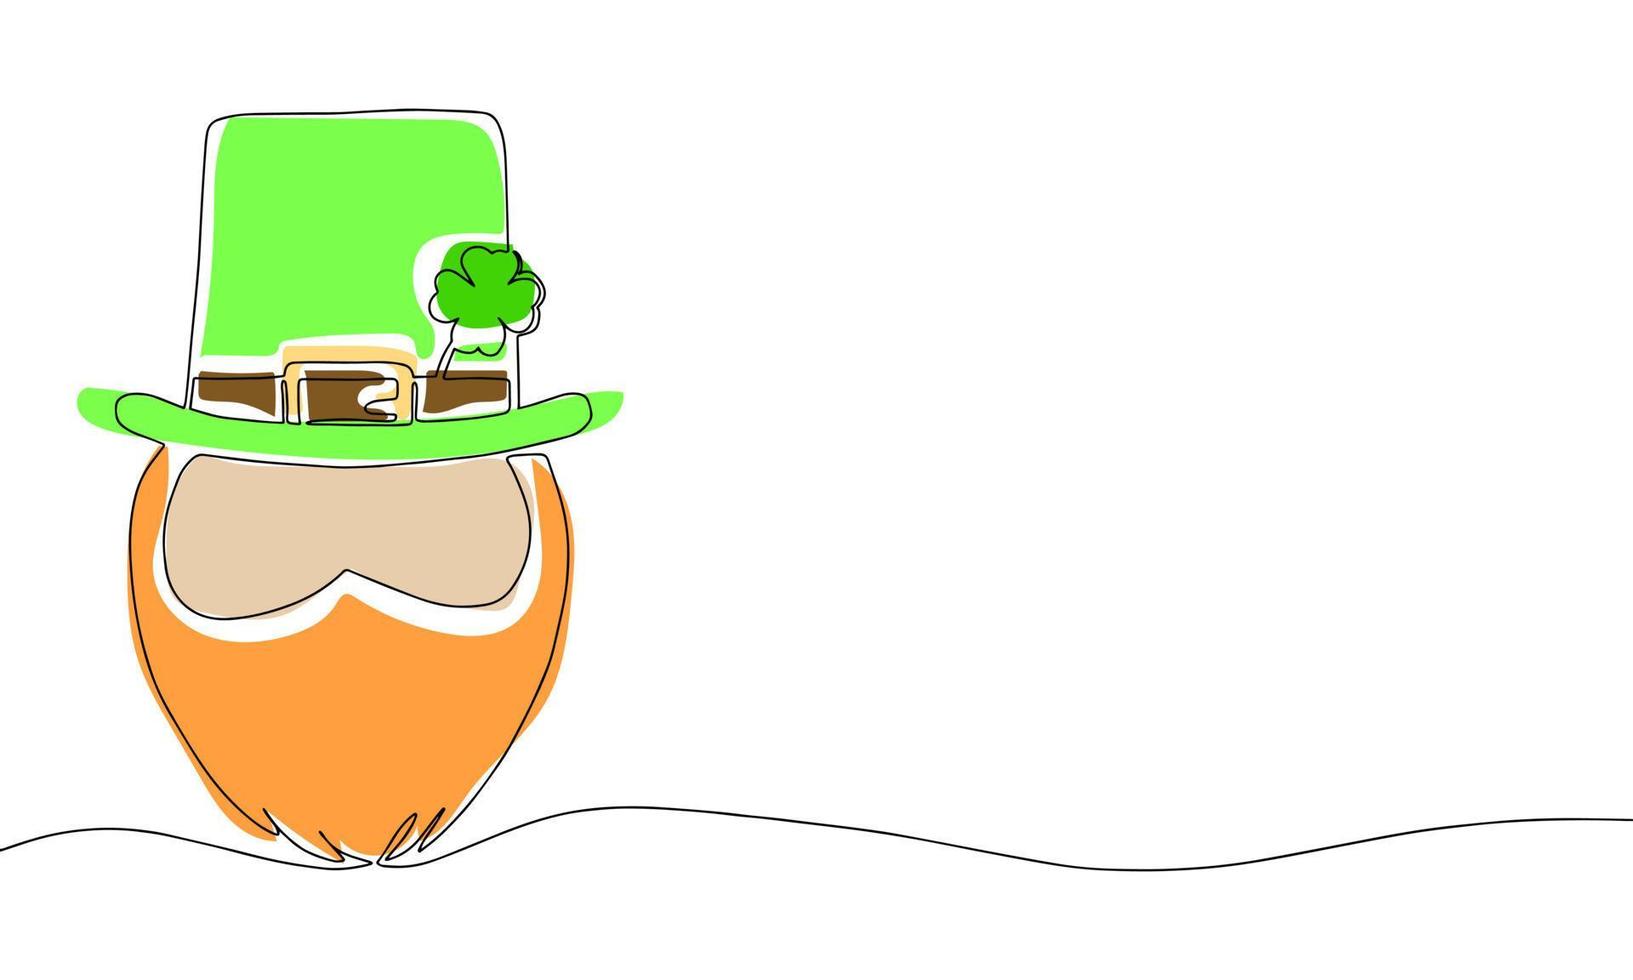 Leprechaun's face with hat. Line art illustration with color. Outline, one continuous vector illustration. St. Patrick's Day. 17 March. Good luck.